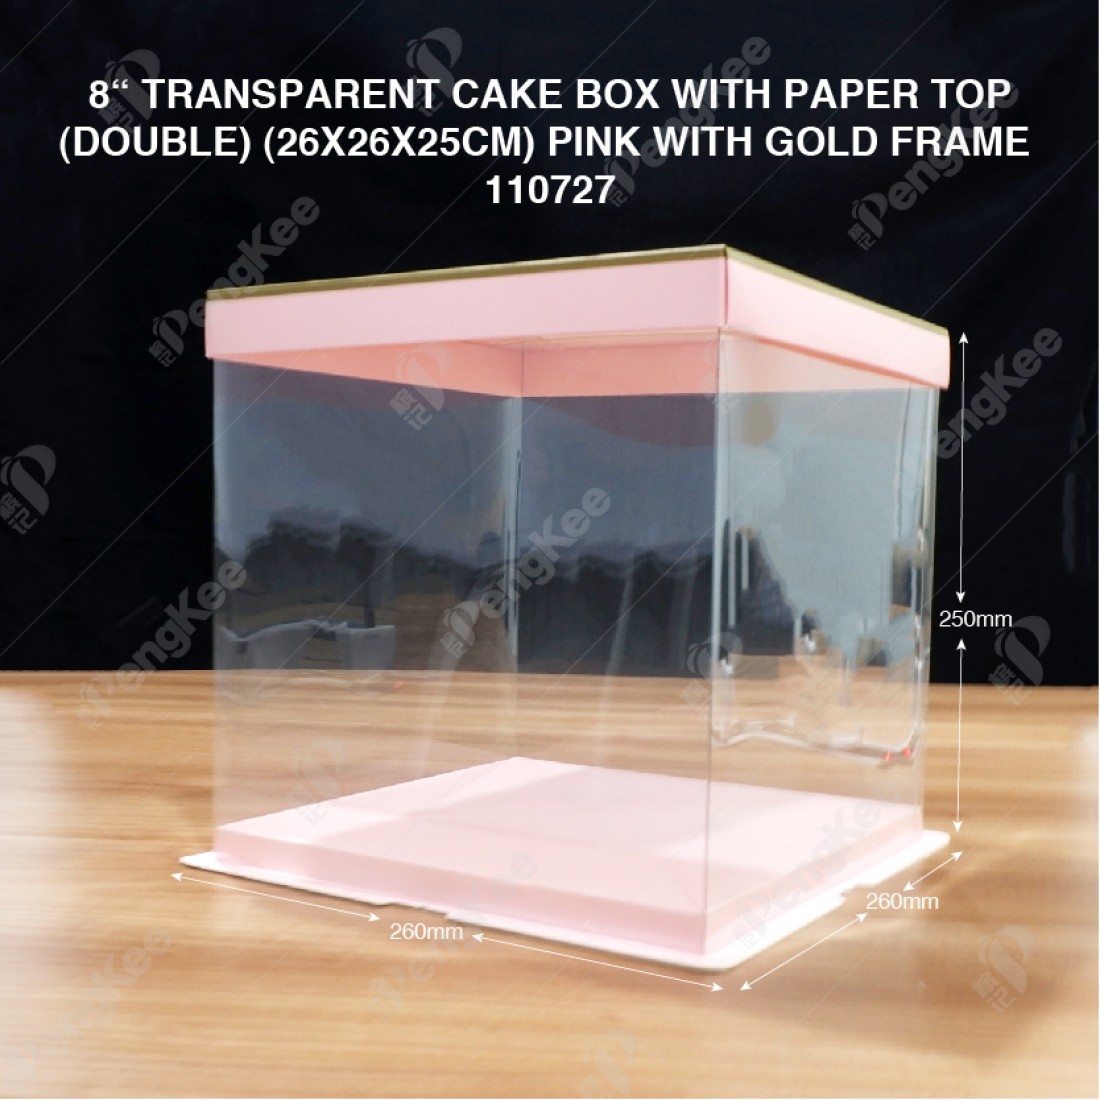 8" TRANSPARENT CAKE BOX WITH PAPER TOP(DOUBLE) (26*26*25CM)- PINK WITH GOLD FRAME